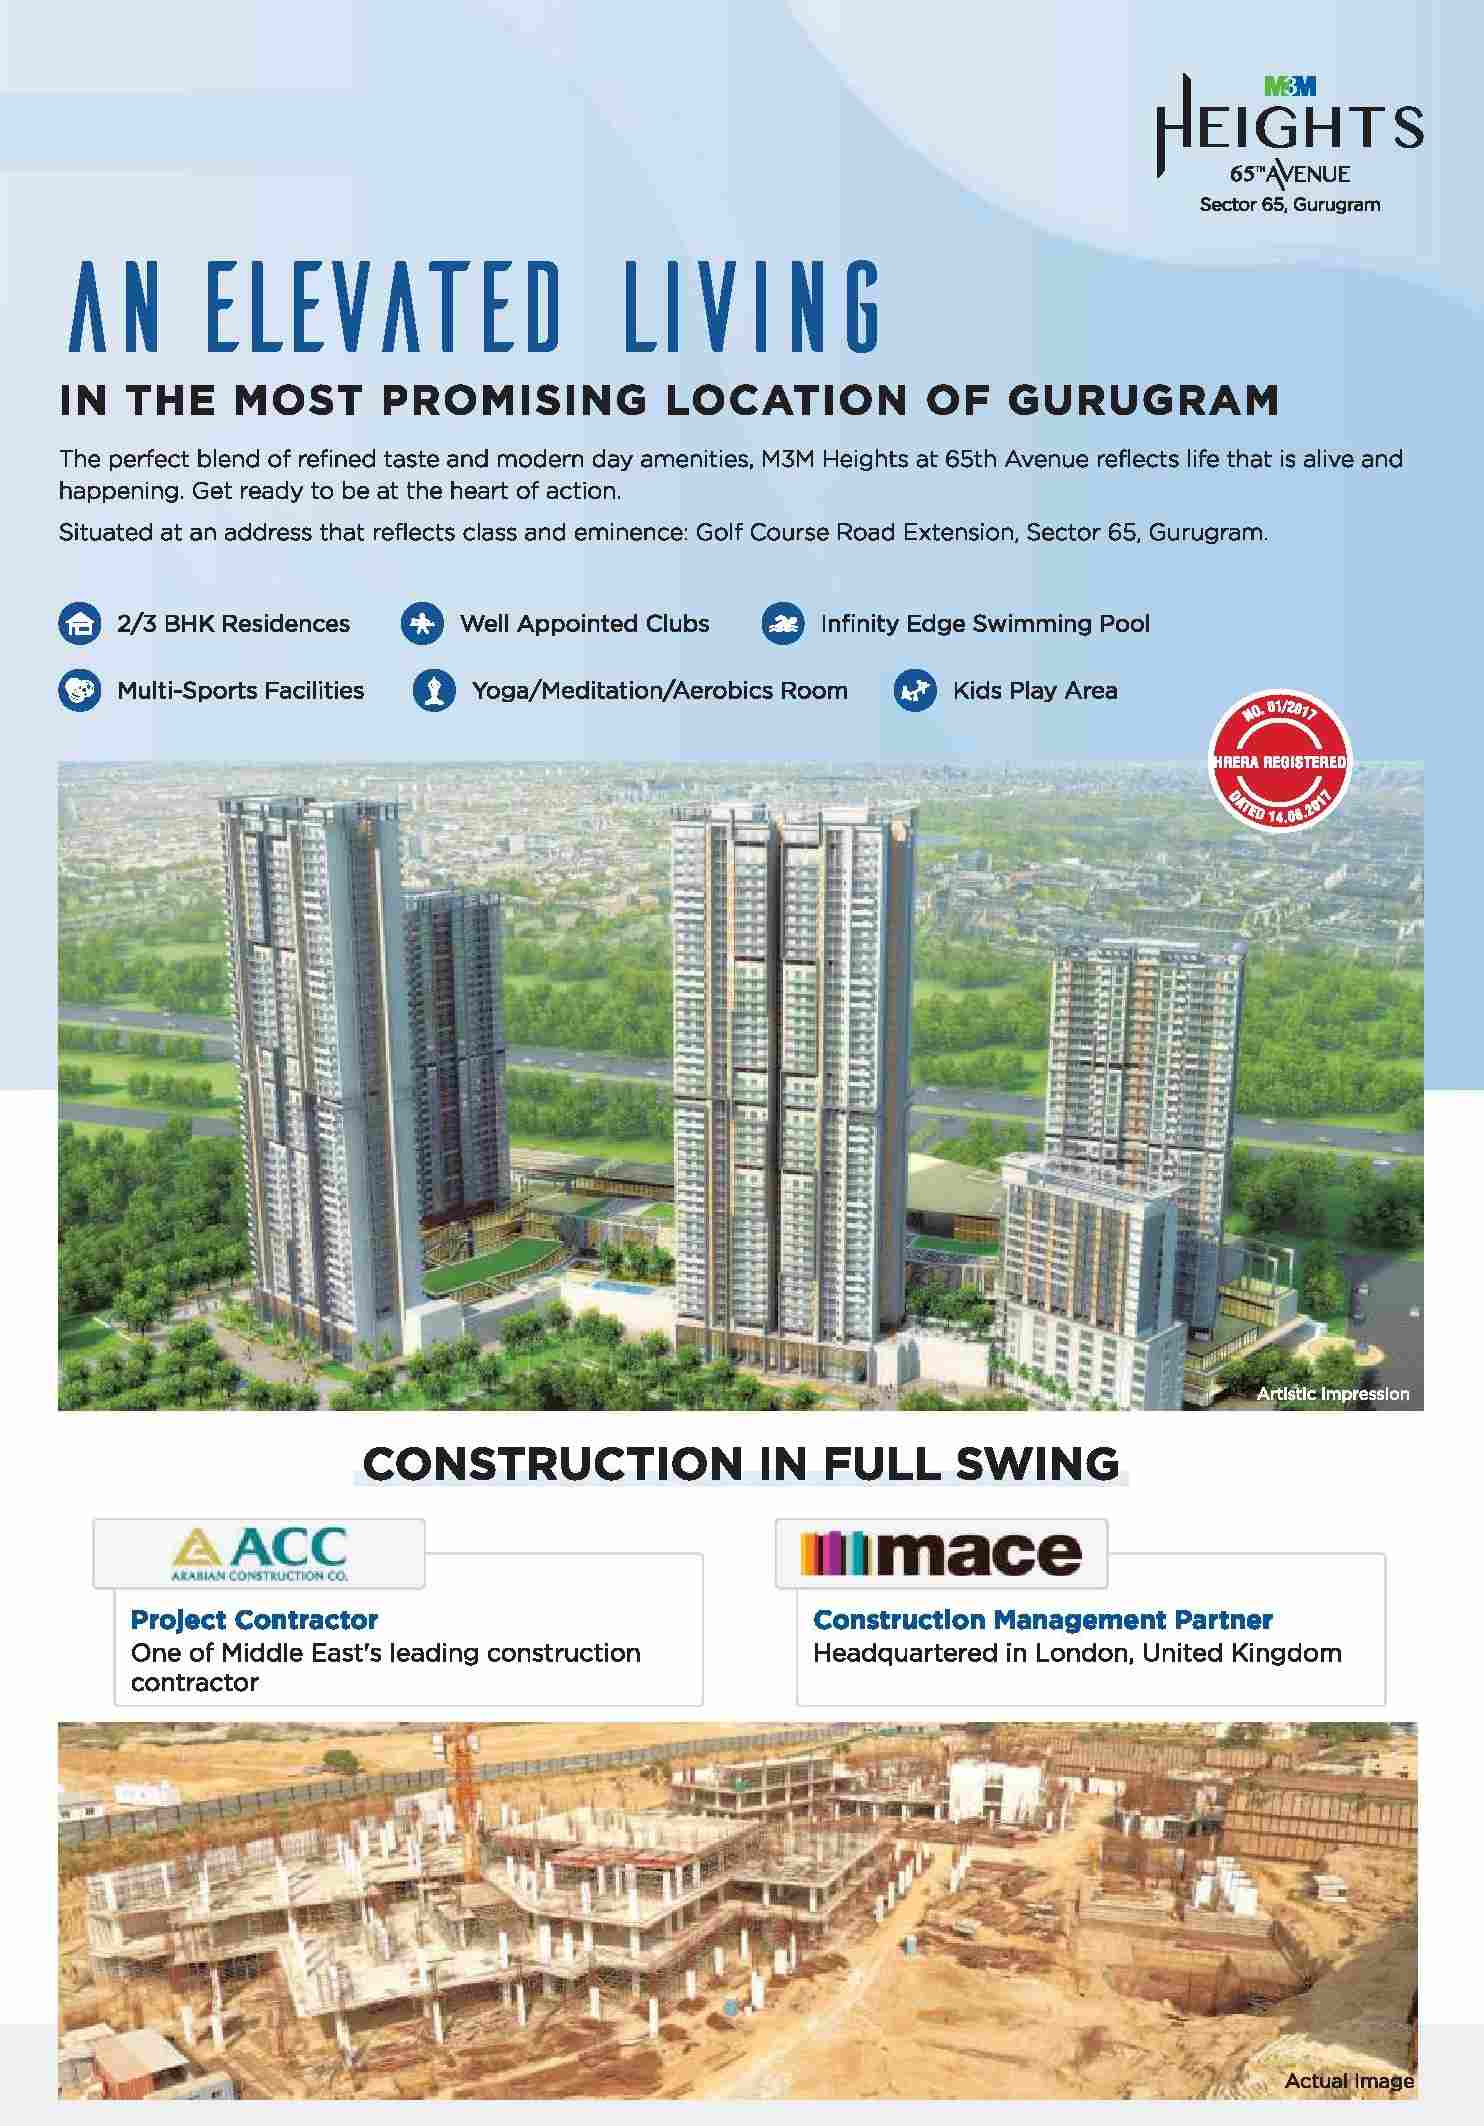 Experience the perfect blend of refined taste & modern day amenities at M3M Heights 65th Avenue, Gurgaon Update